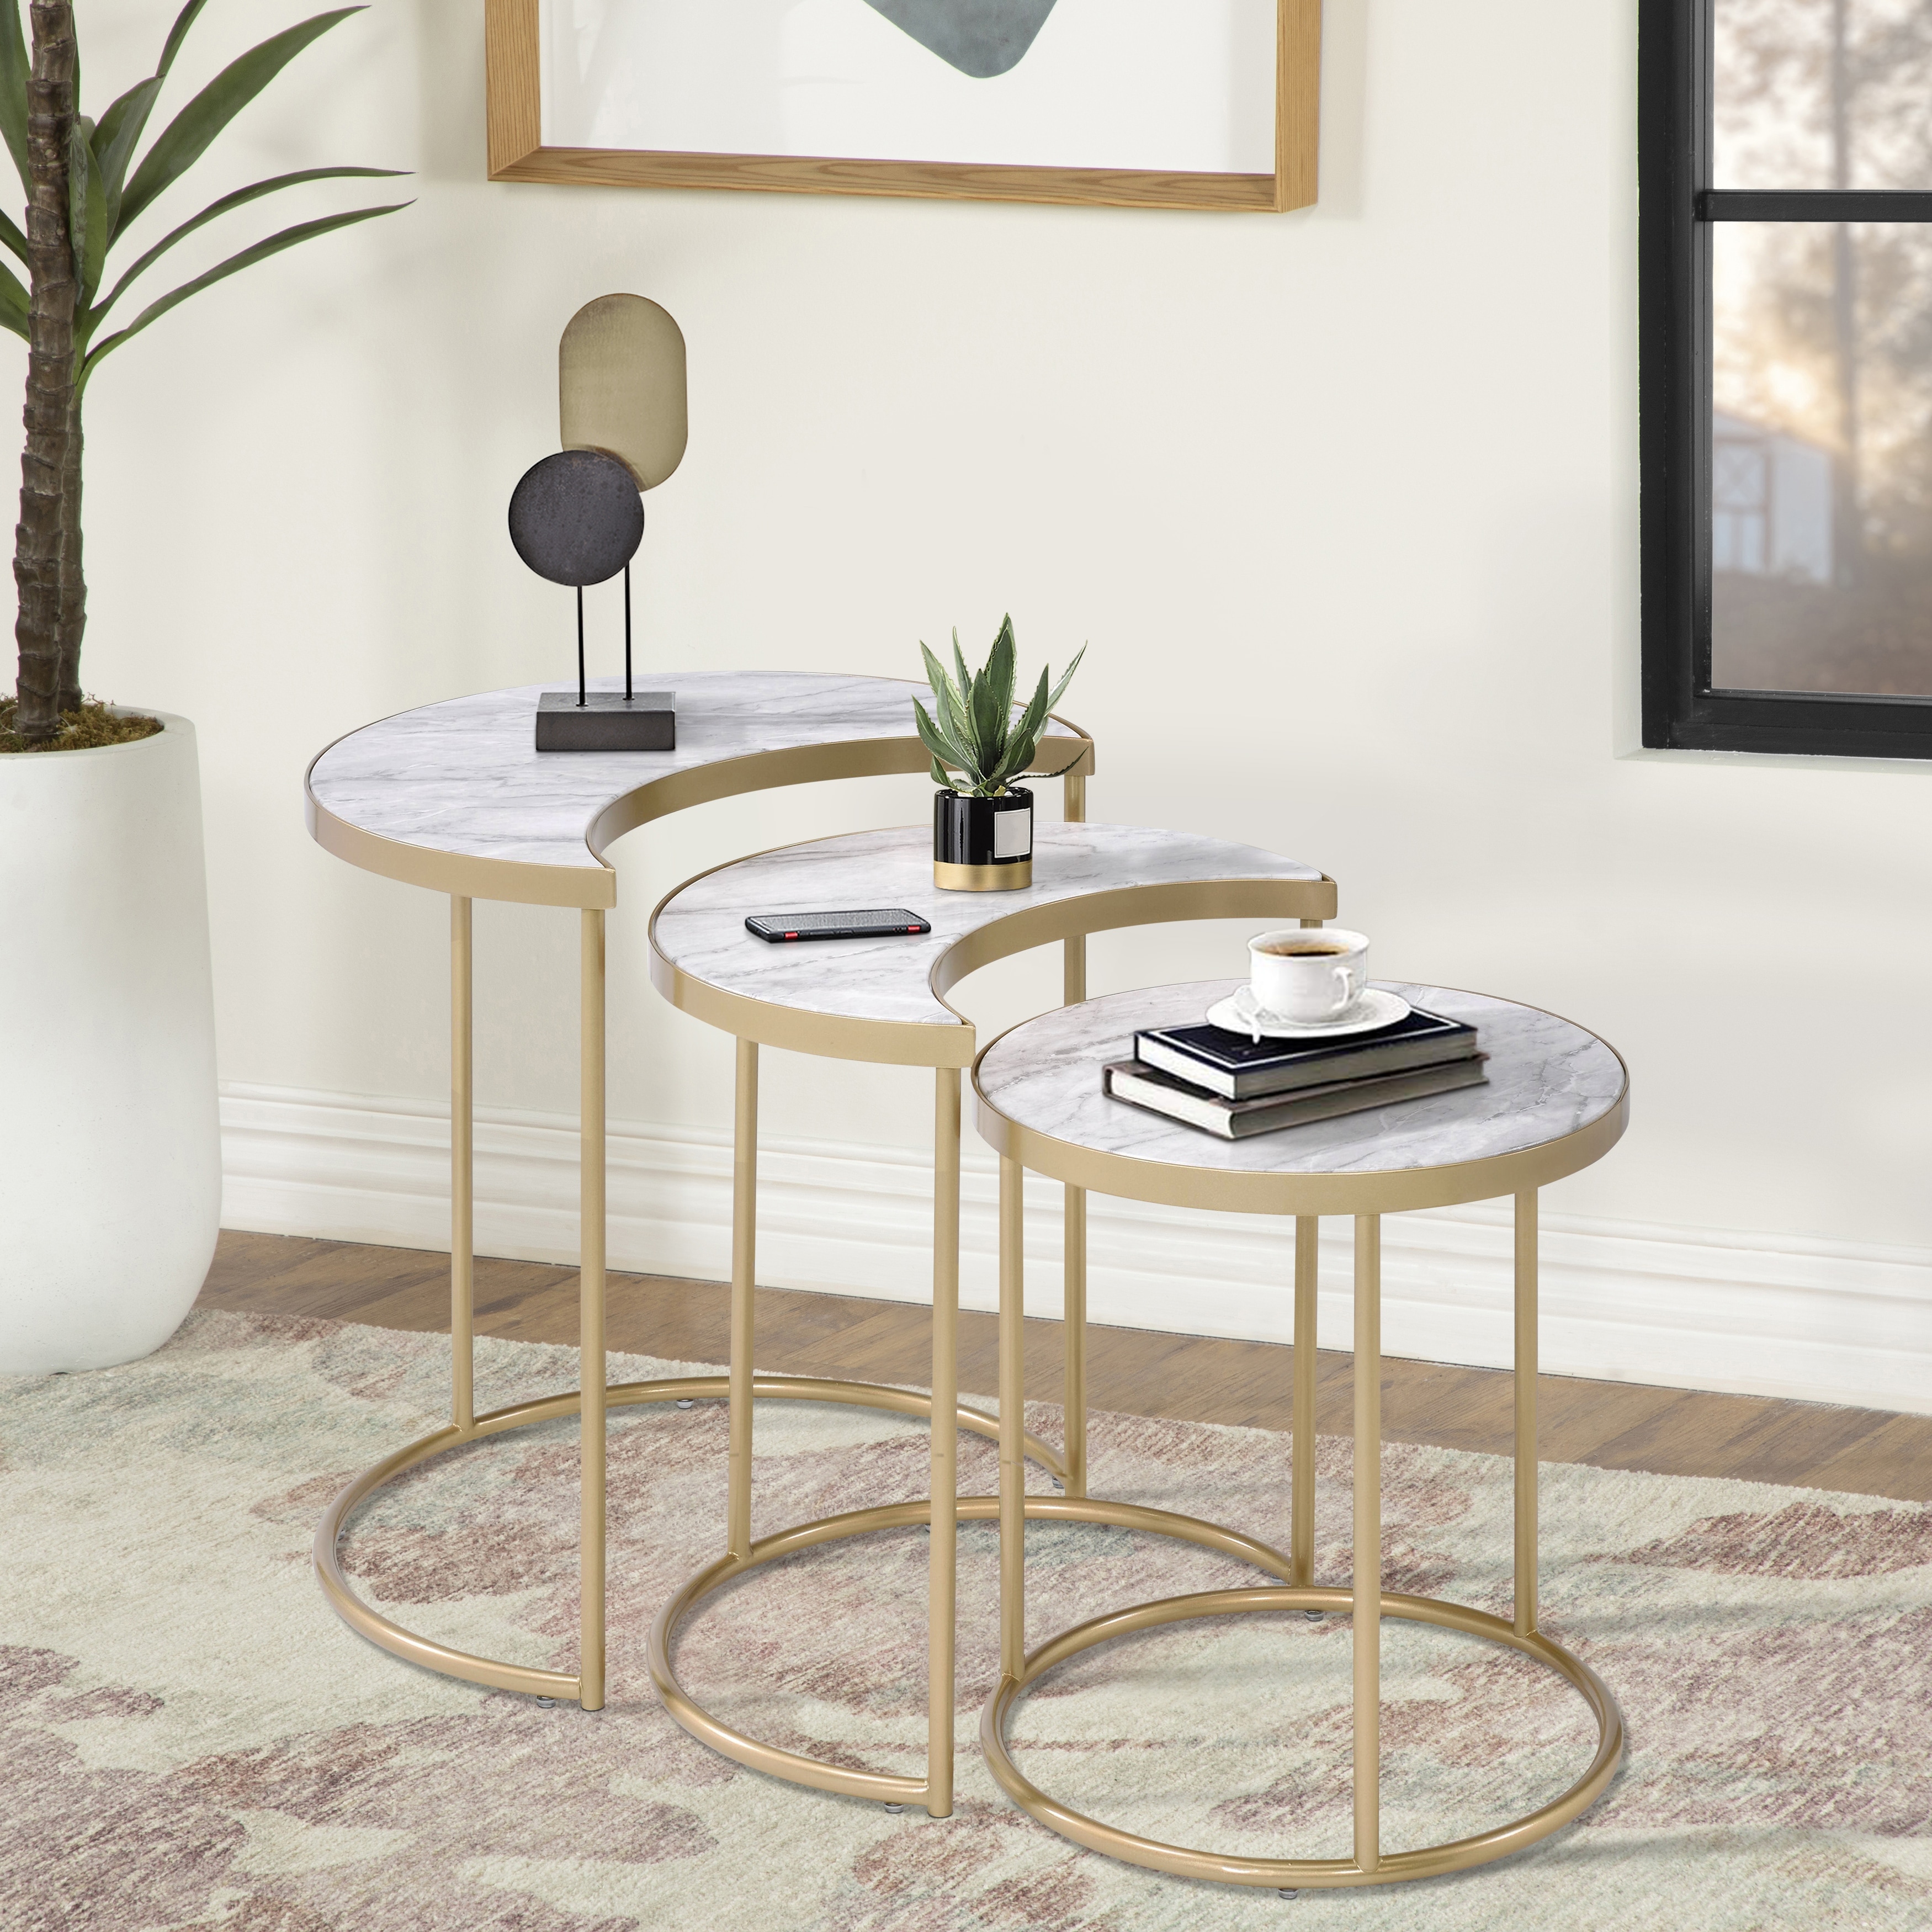 CDecor Galileo Faux Marble and Gold 3-piece Nesting Tables